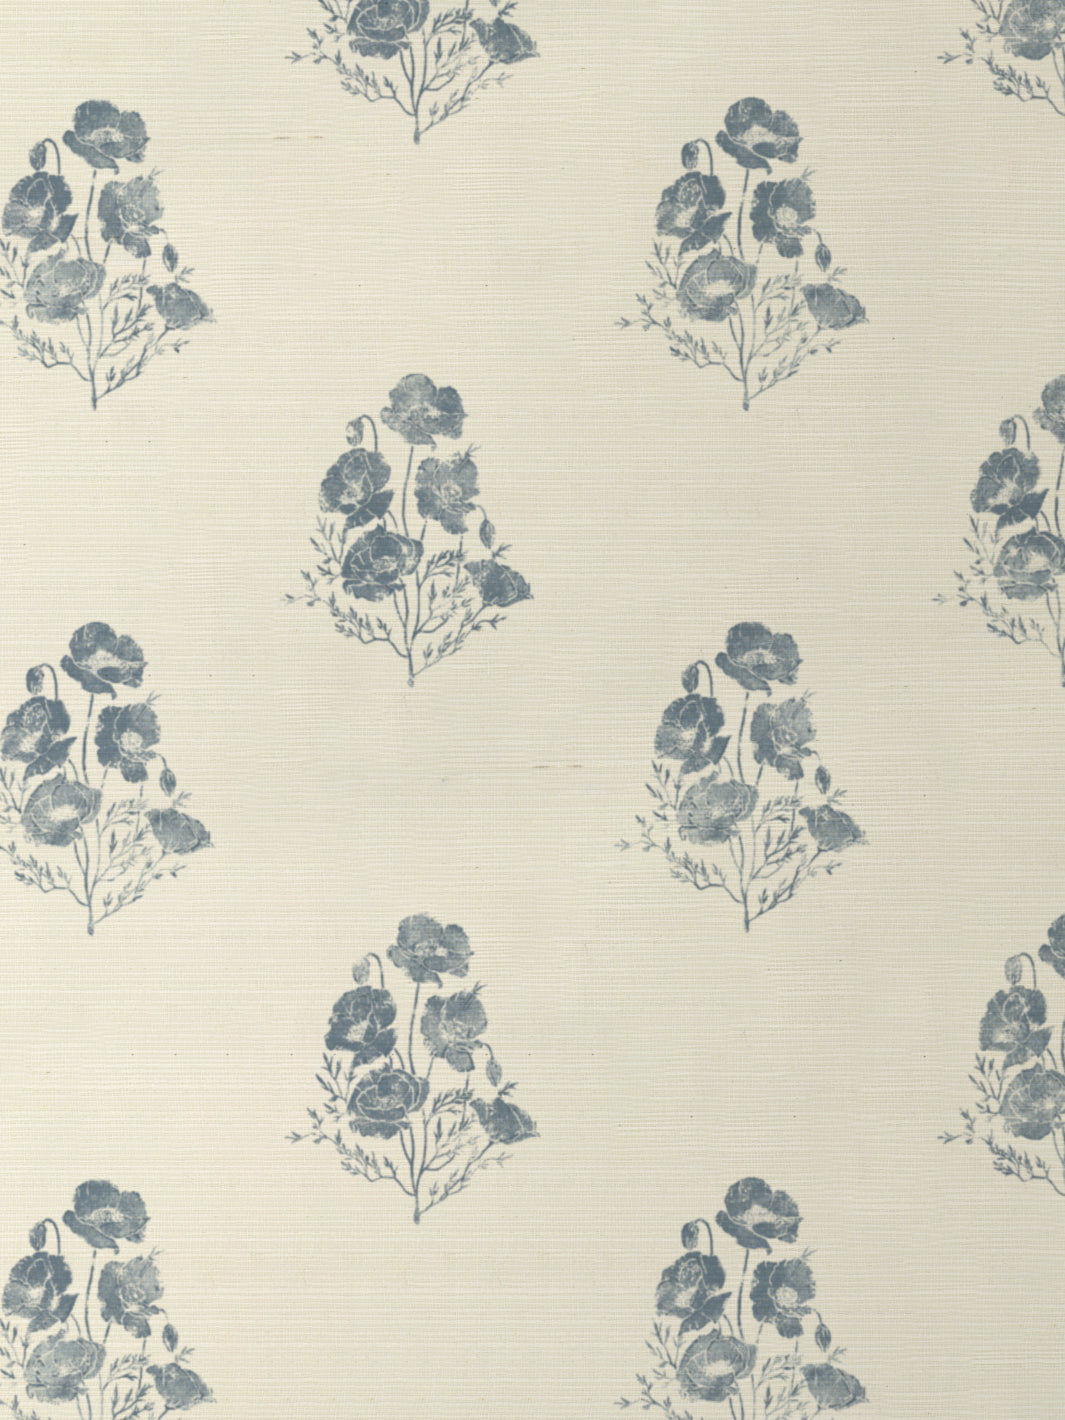 'California Poppy' Grasscloth Wallpaper by Nathan Turner - Blue